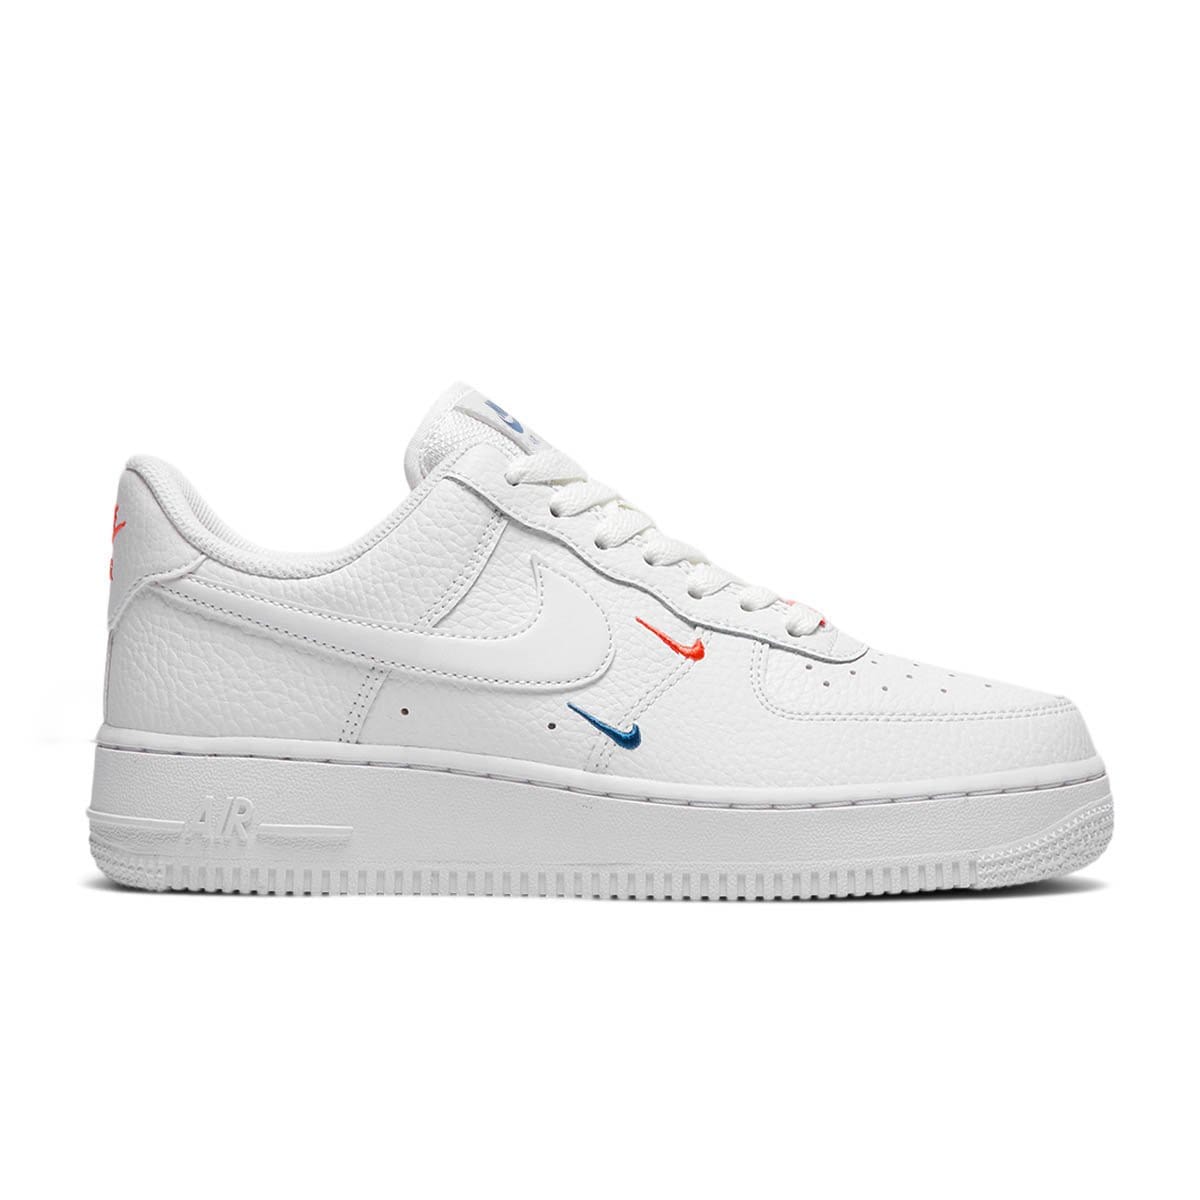 Nike Shoes WOMEN'S AIR FORCE 1 '07 ESSENTIAL